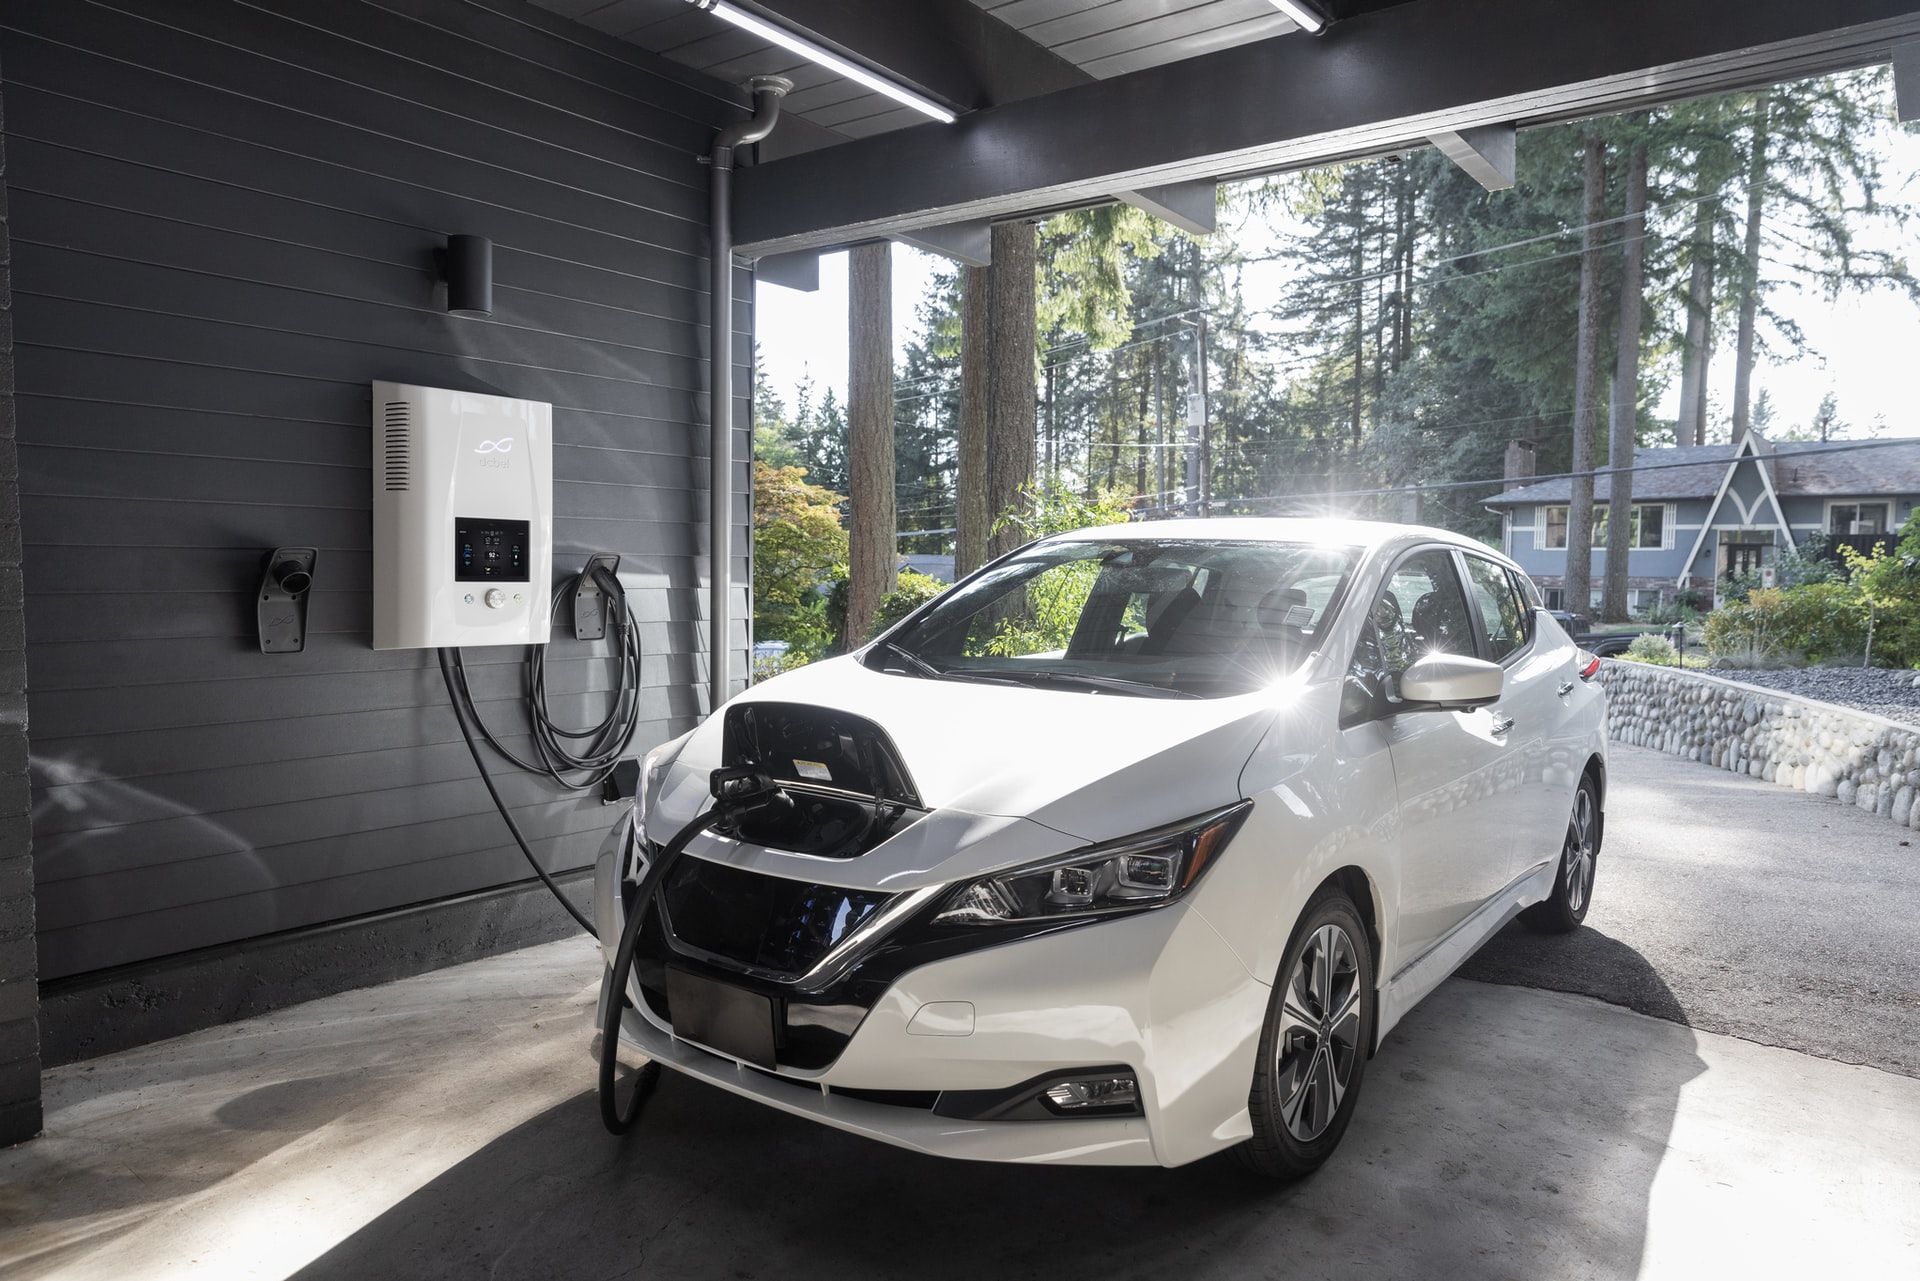 nissan leaf white charging in garage via level 2 home charger